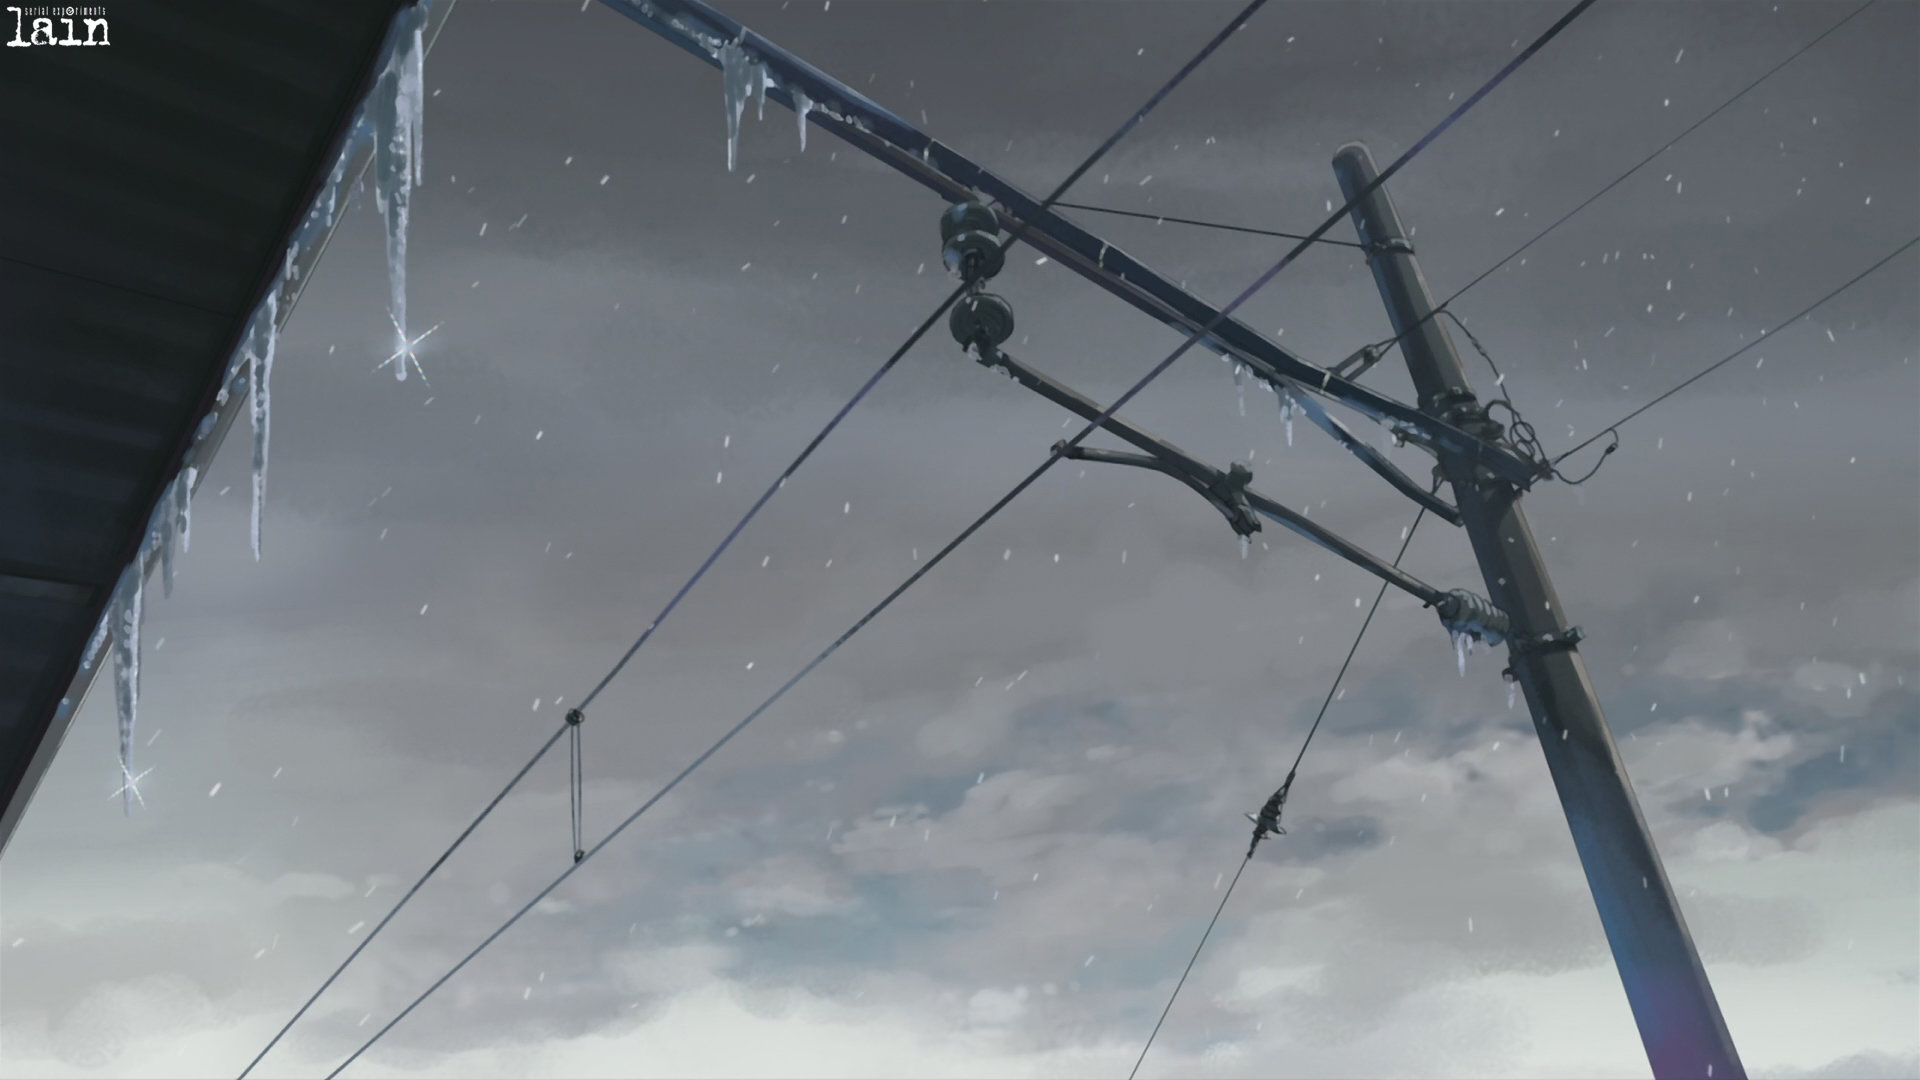 Download full hd 1920x1080 5 (cm) Centimeters Per Second computer wallpaper ID:90043 for free